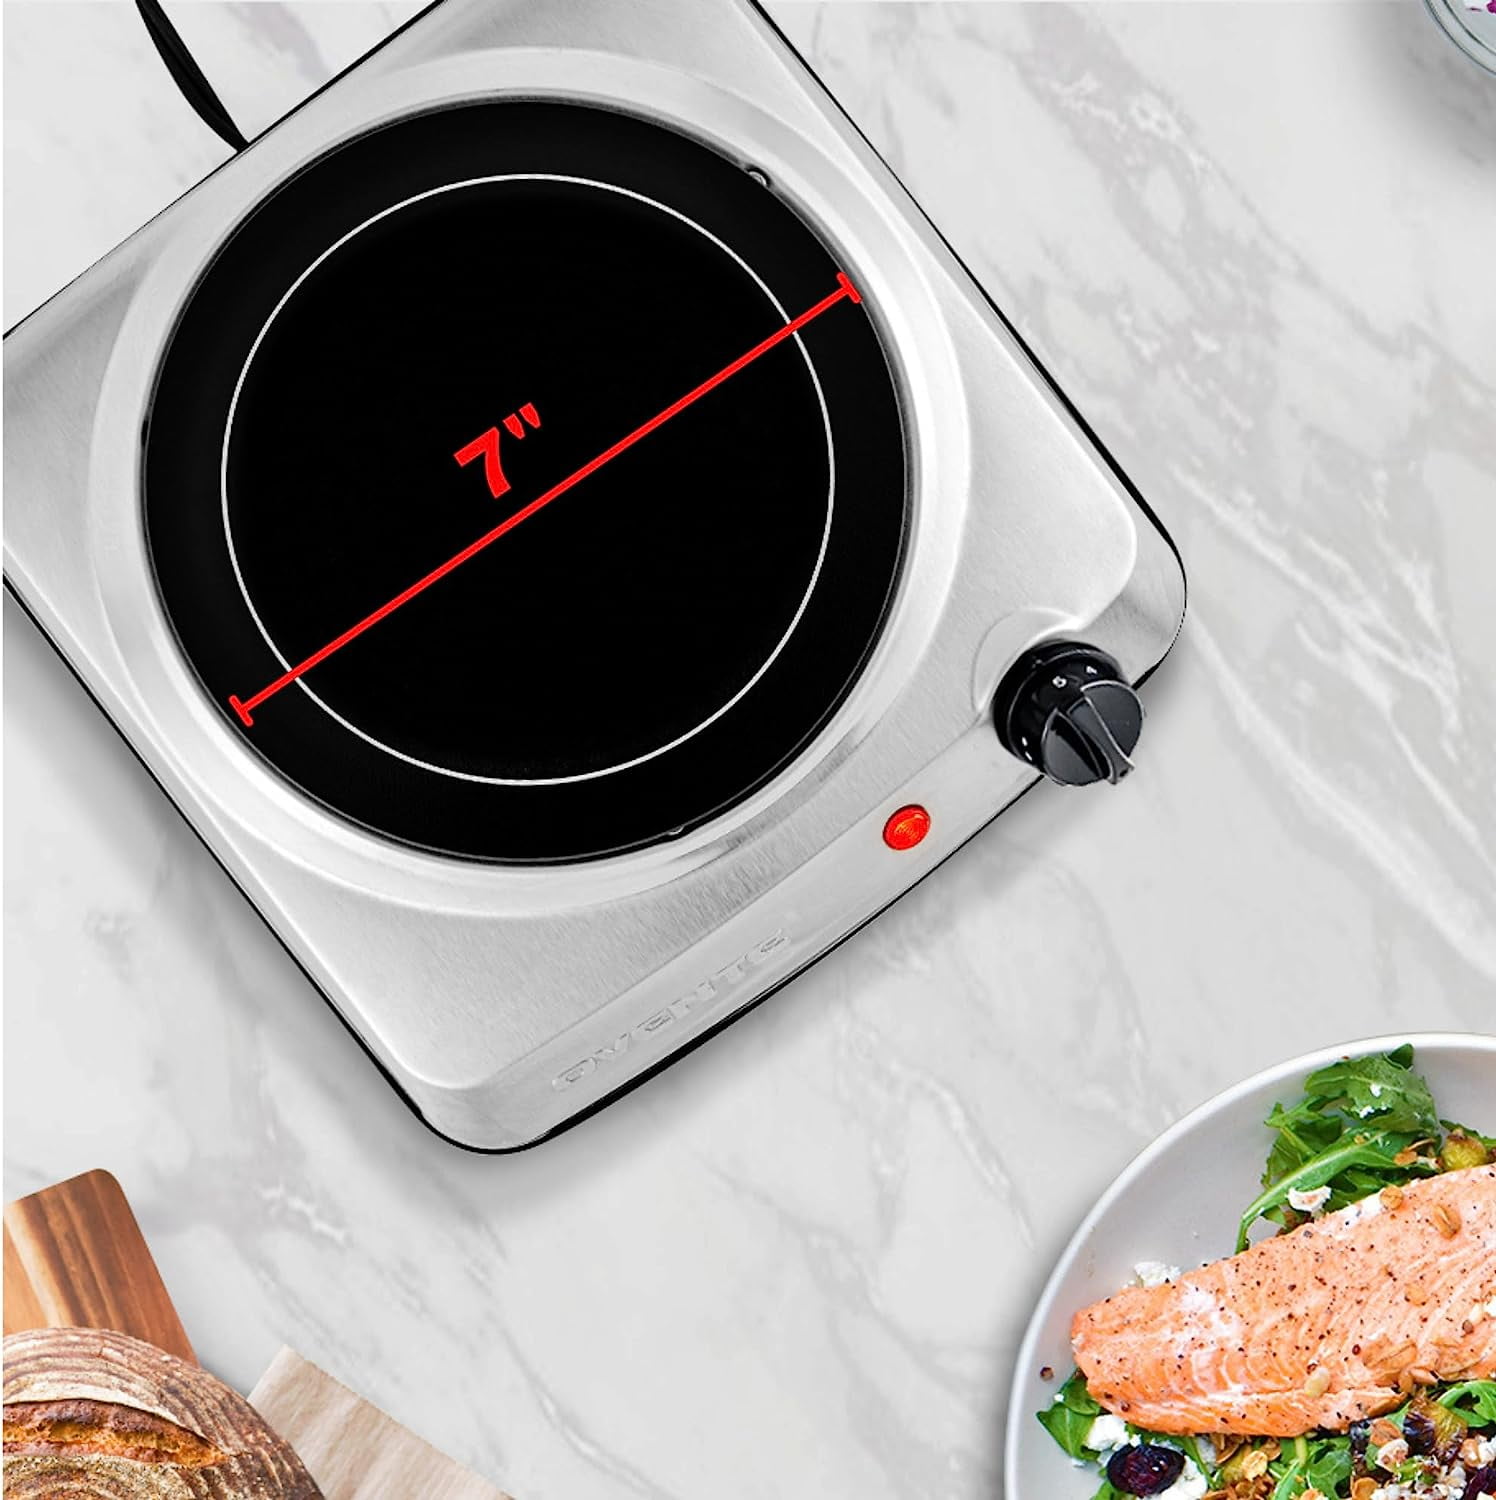 OVENTE Countertop Infrared Double Burner, 1700W Electric Hot Plate